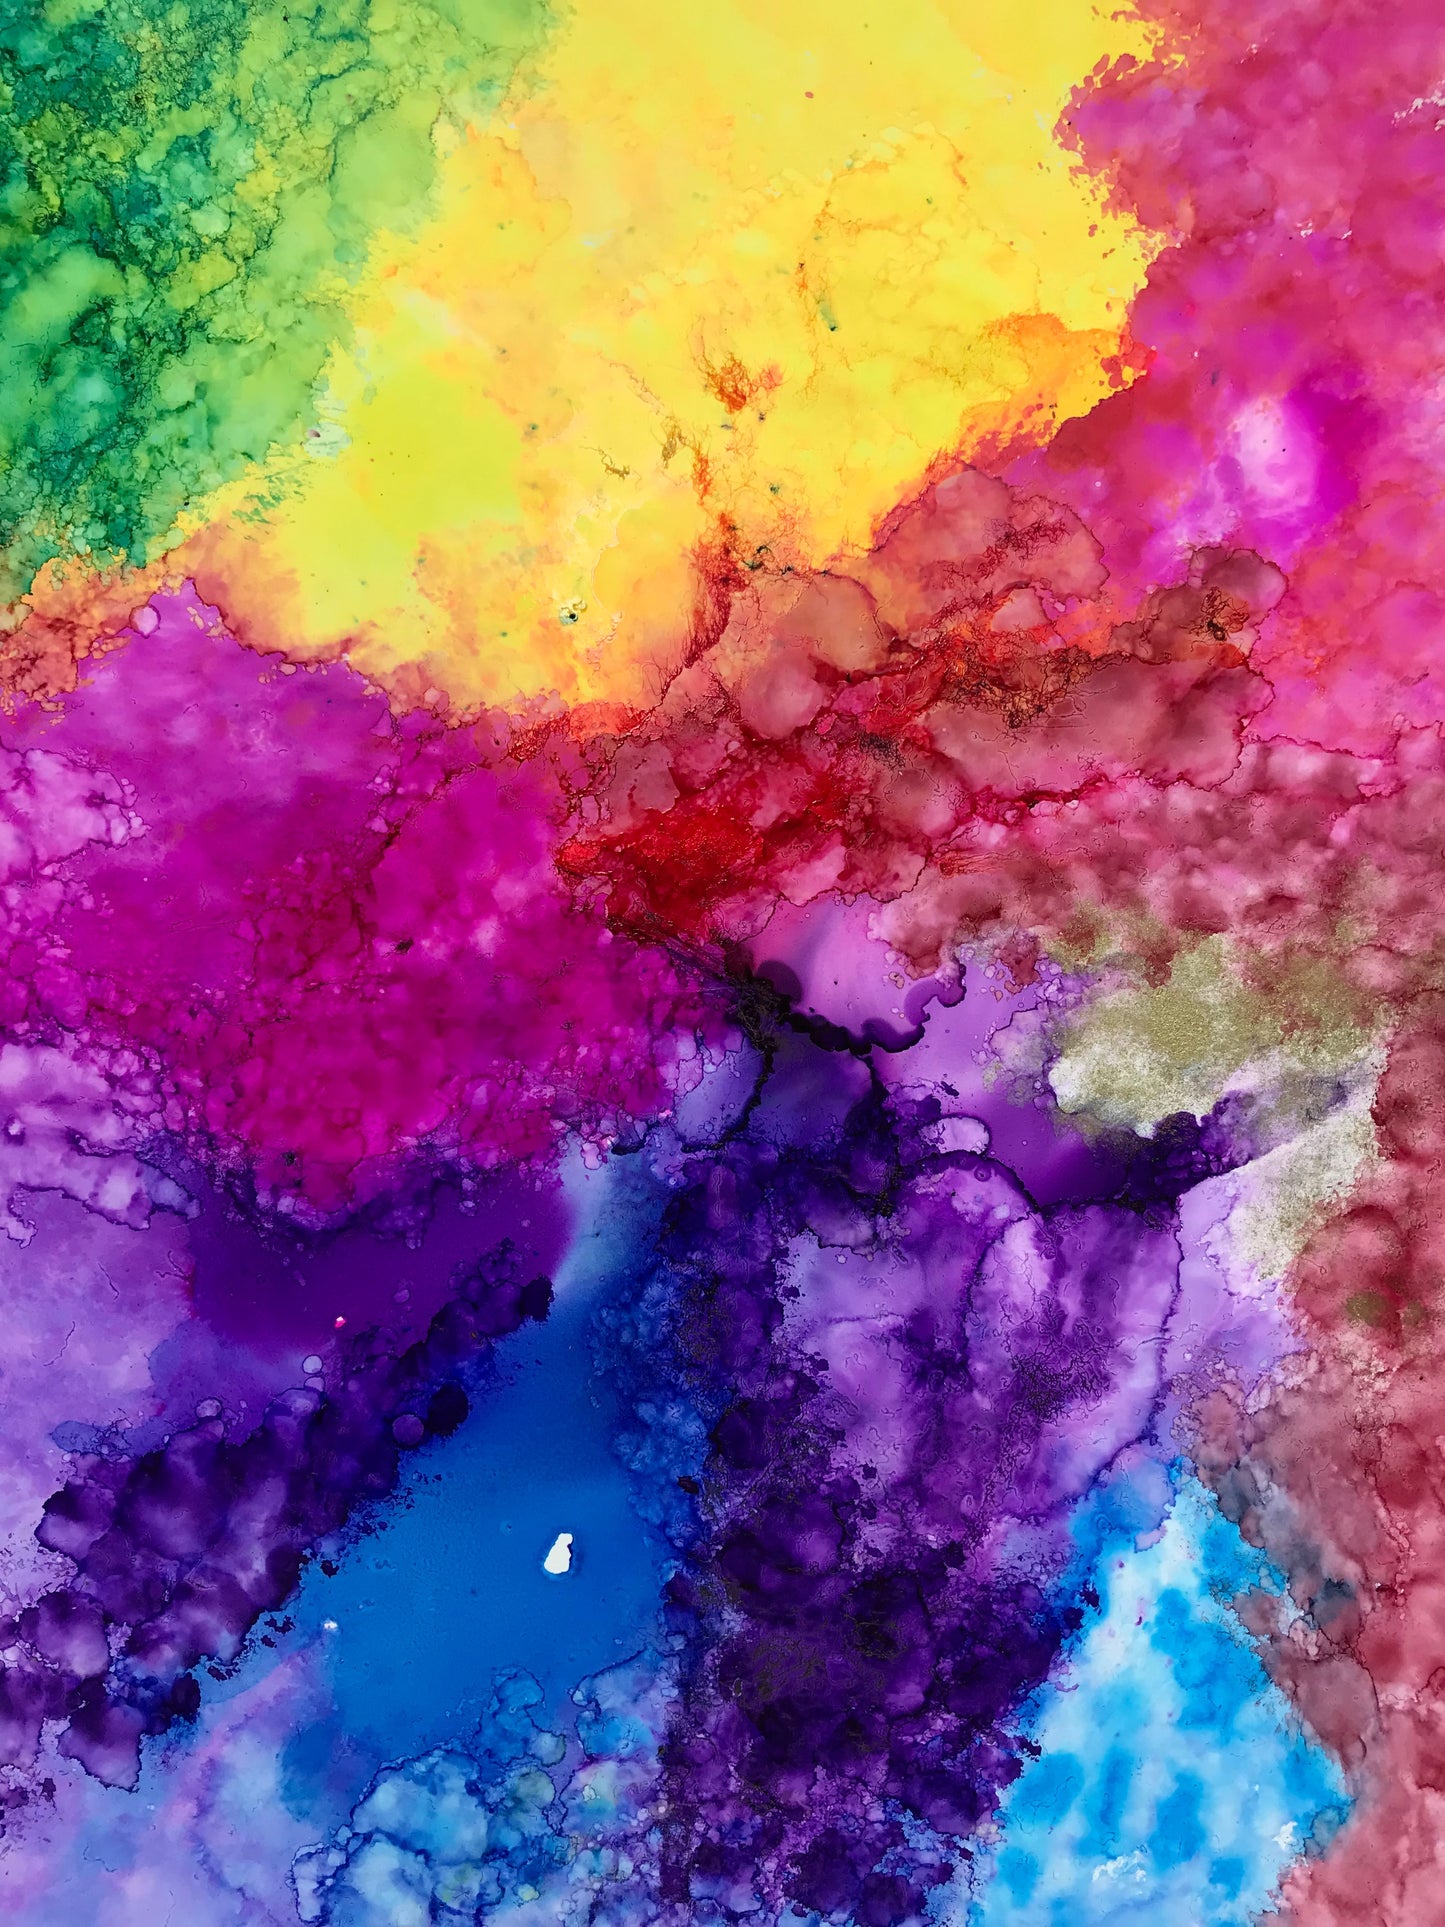 Wed, Apr 28, 1230-230P "Alcohol Inks" Public Houston Painting Class